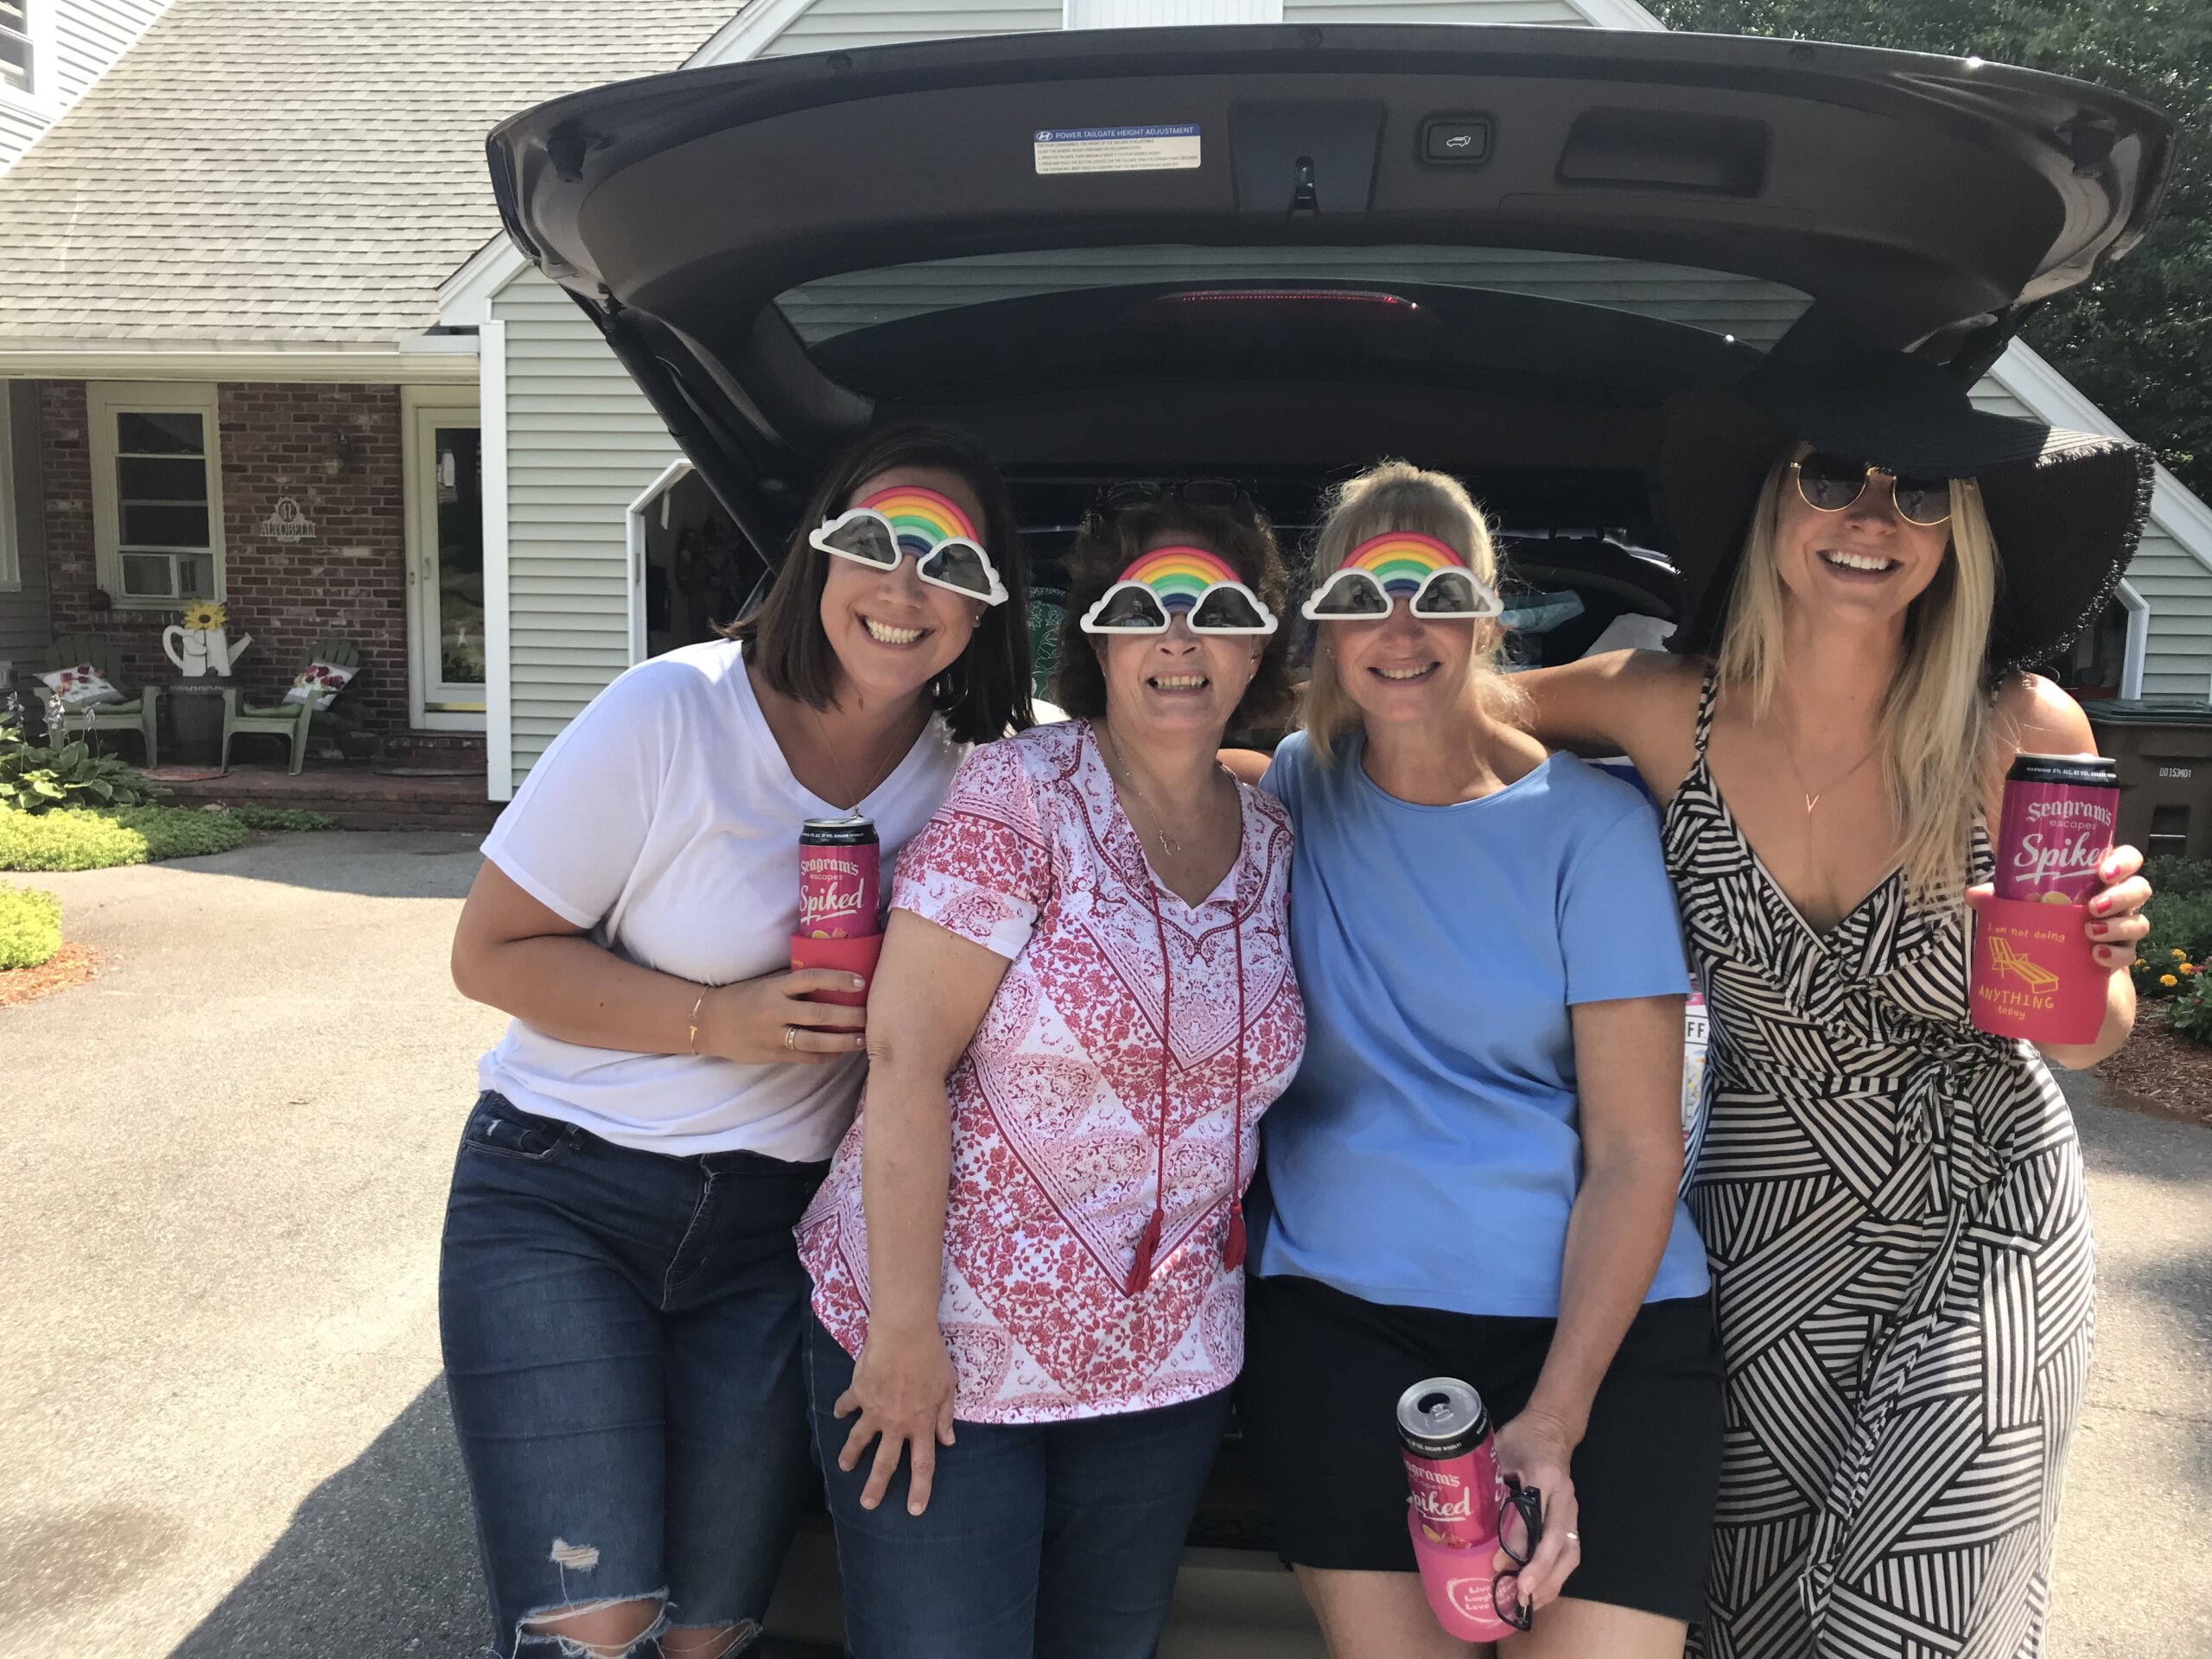 the ladies, quitting alcohol, quitting drinking, getting sober, hardest part of quitting alcohol, fab 4, drinking buddies, women, rainbow glasses, fun glasses, girls trip, girls weekend